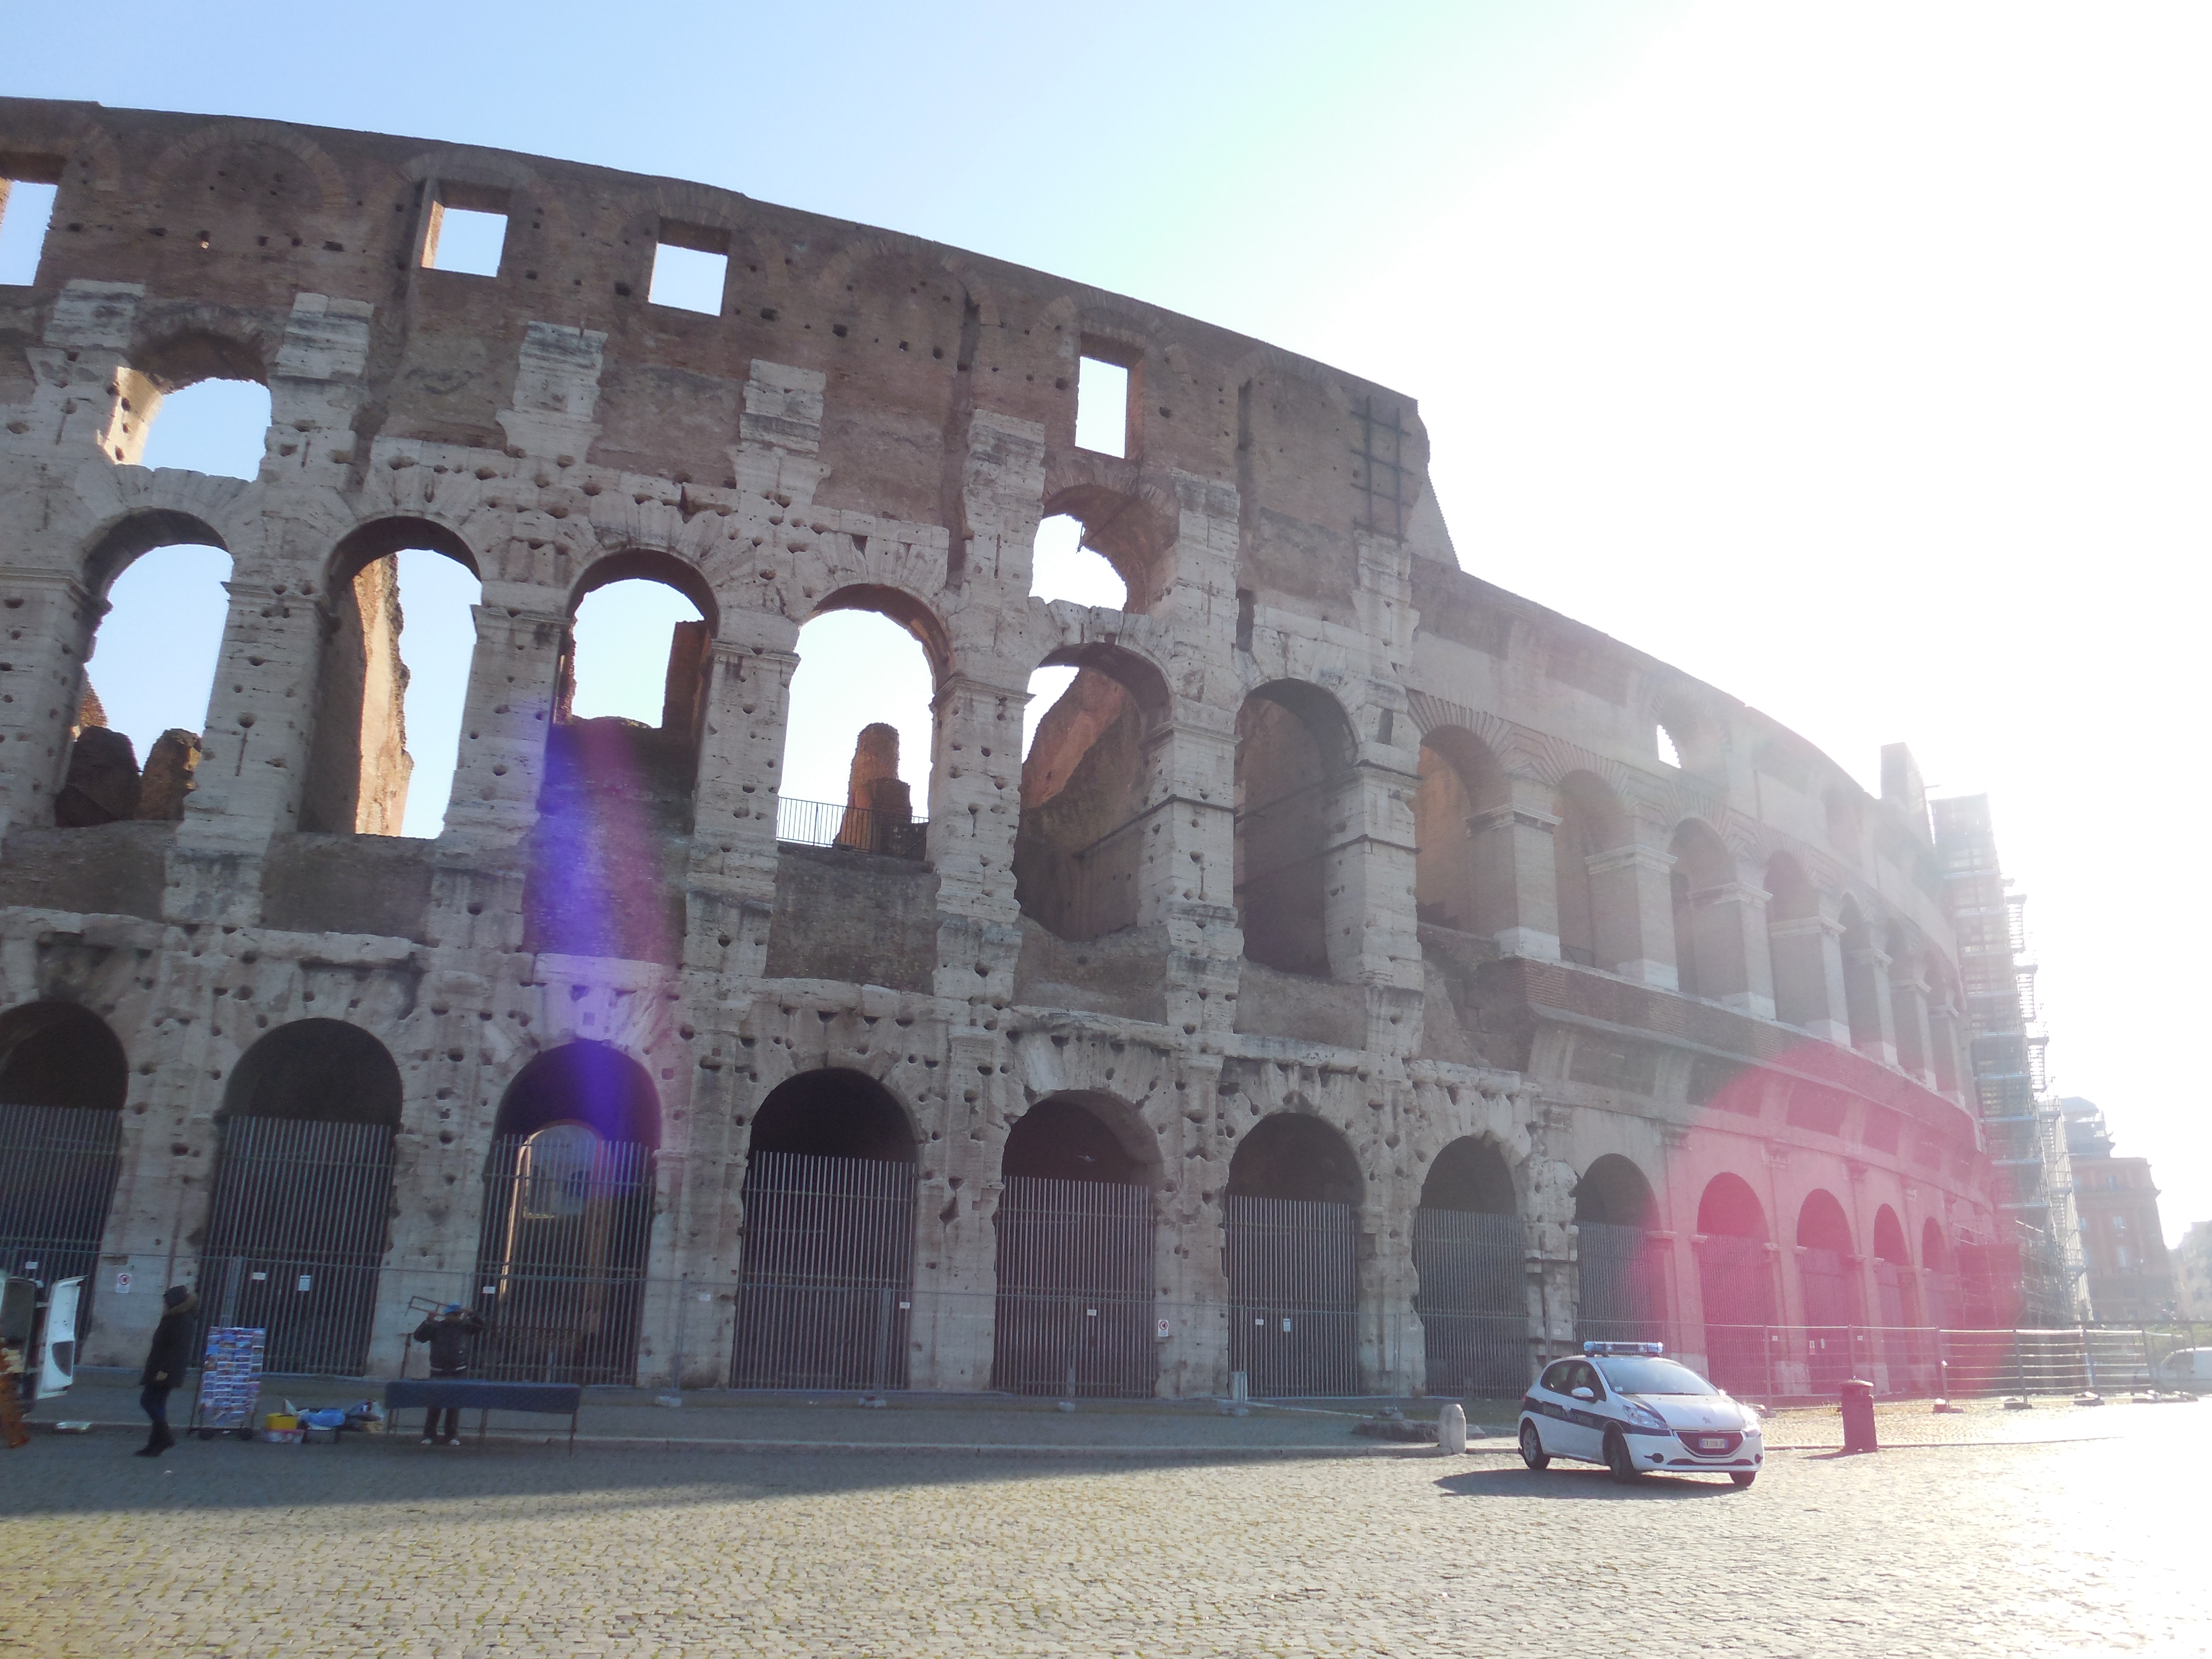 The Colosseum at 8:30am.